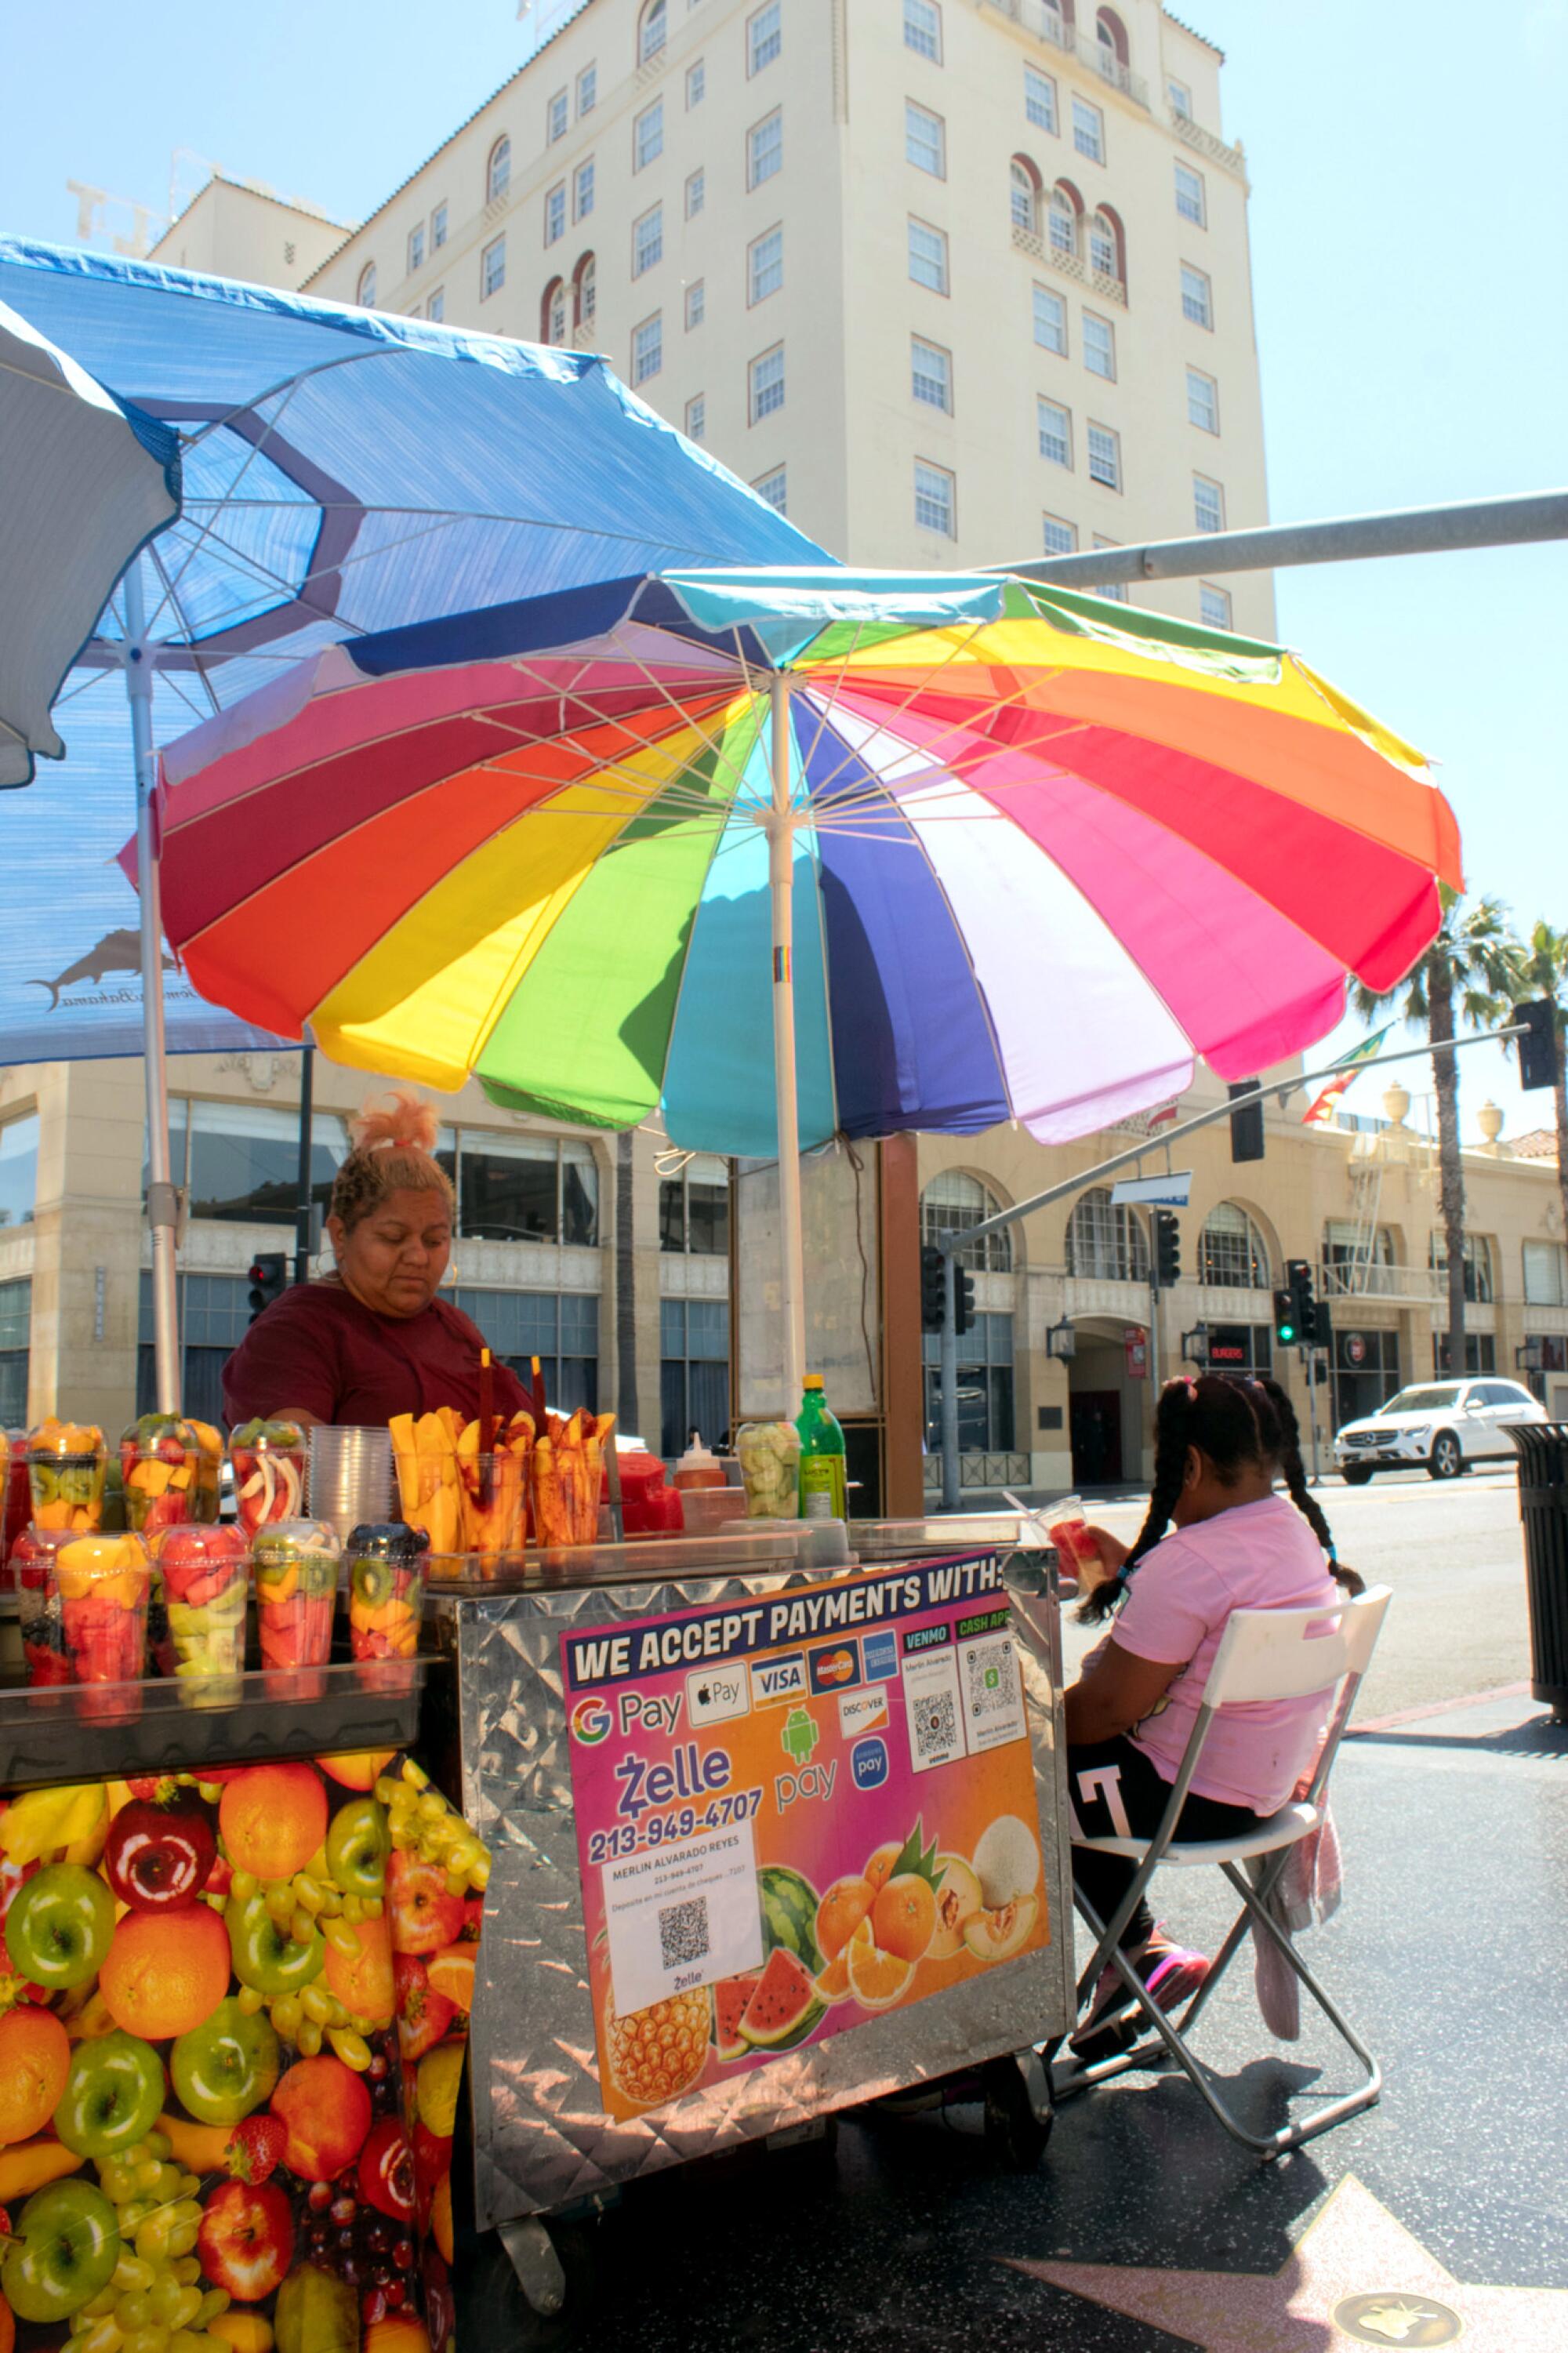 A vendor sits with her stand, which features a rainbow-colored umbrella, along a city street.